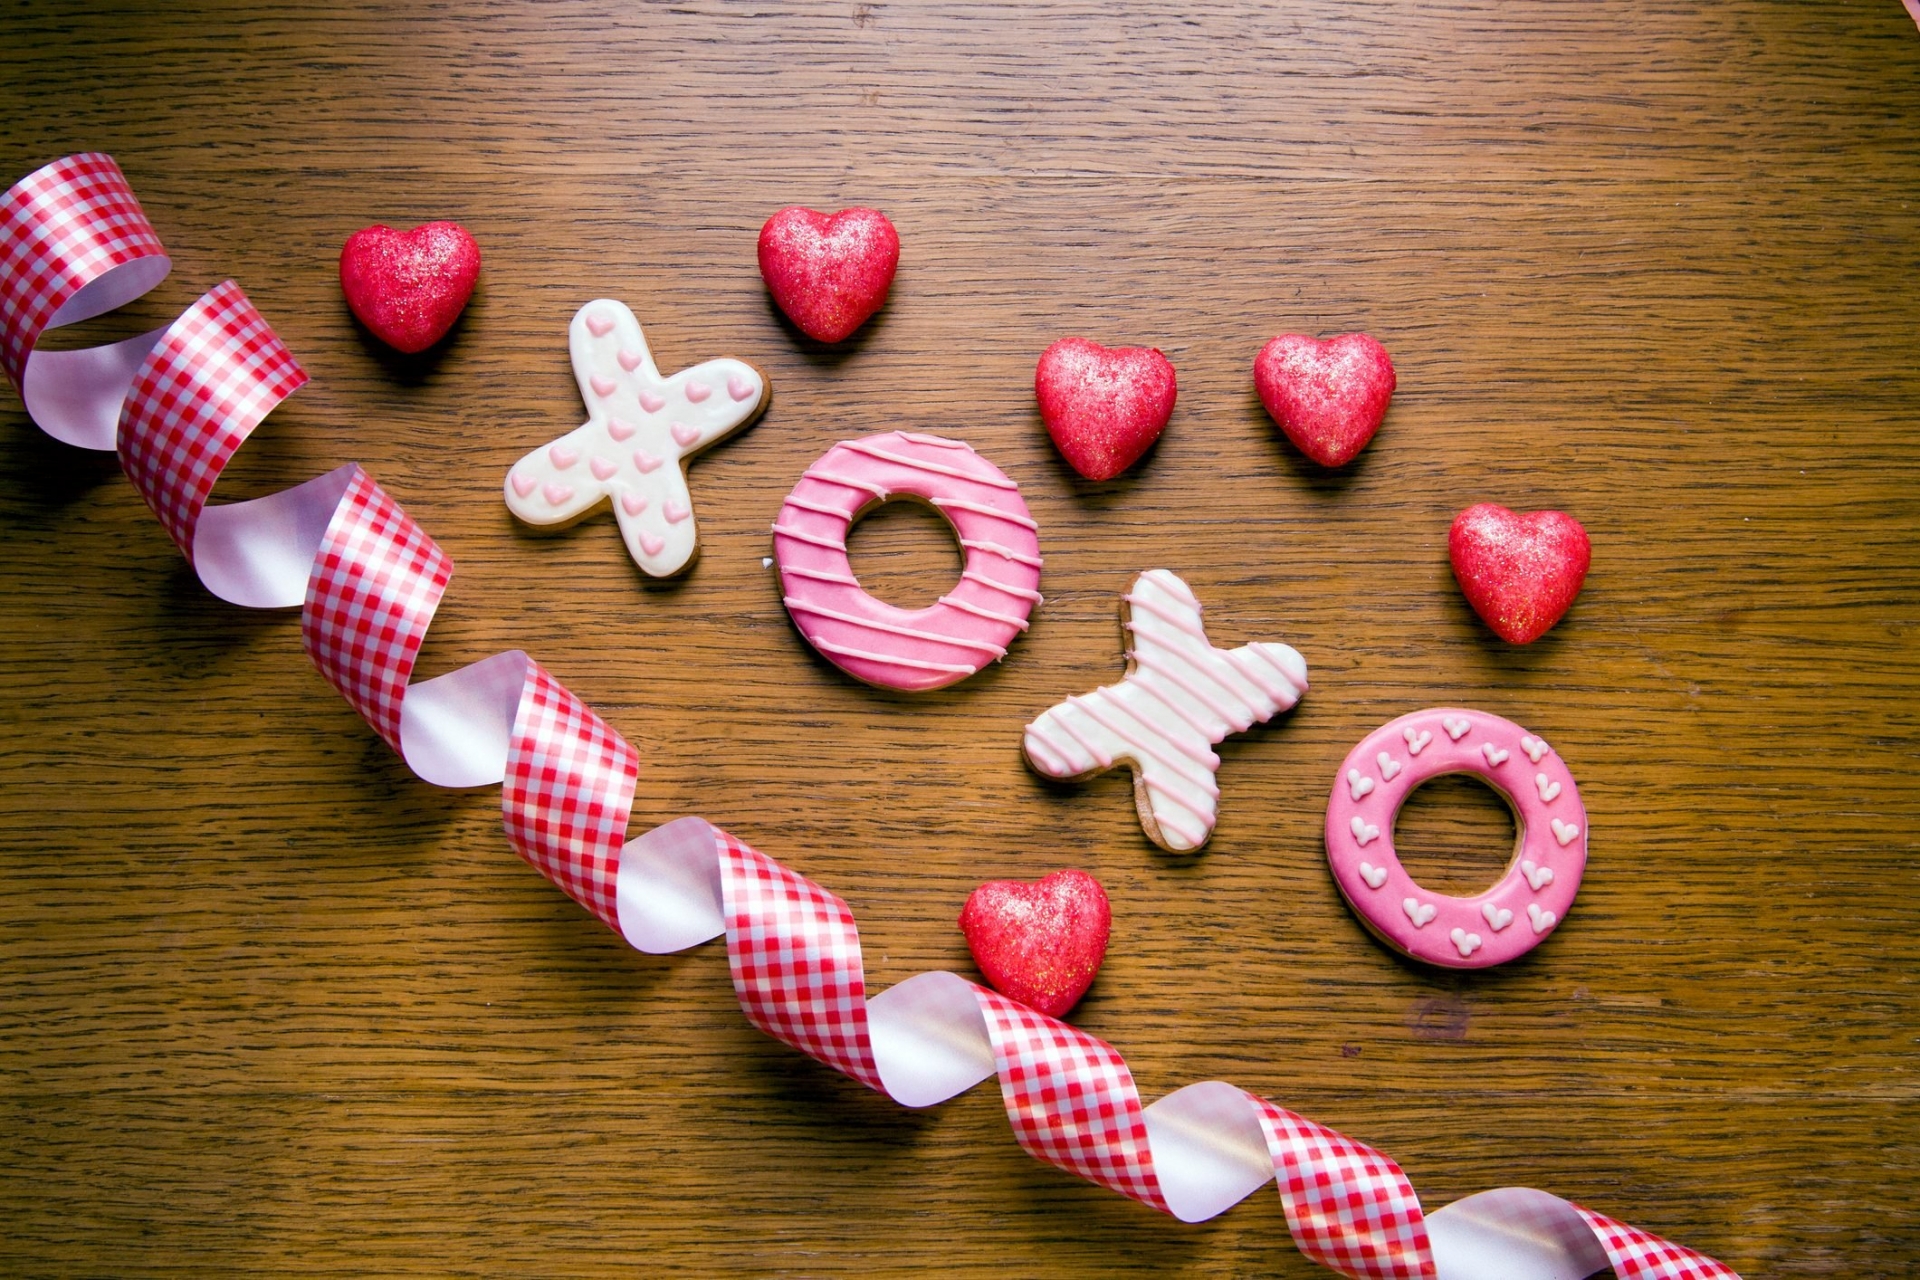 Top 10 Fun Facts about Valentine’s Day that you might not know